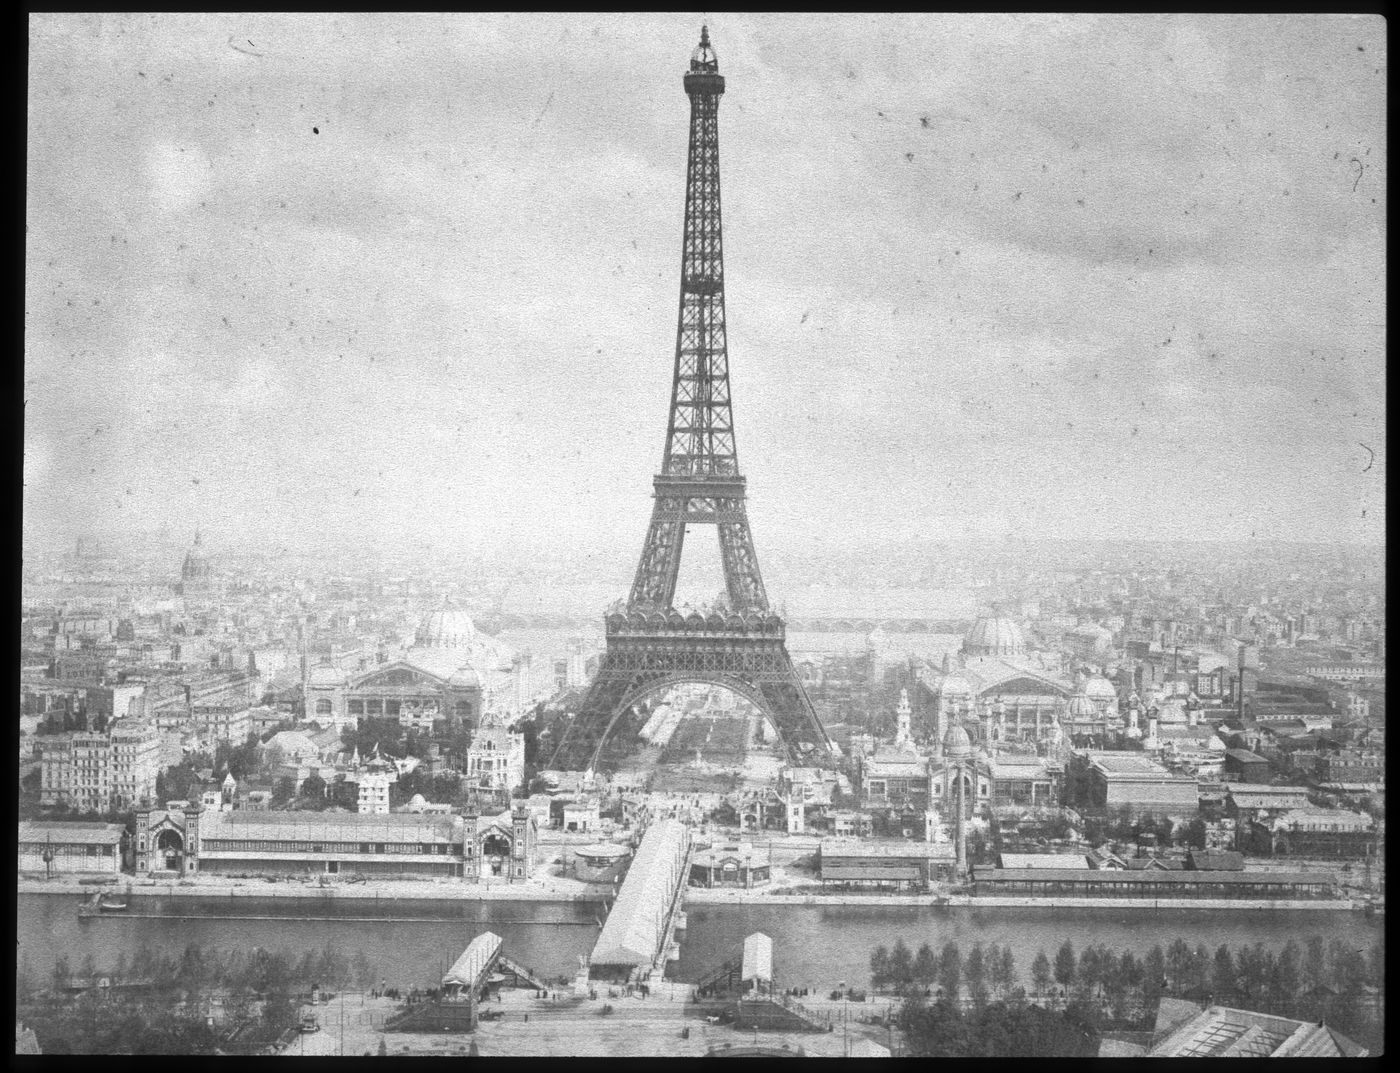 Exposition universelle de 1889 (Paris, France): Panoramic view of Eiffel Tower and exposition grounds across river